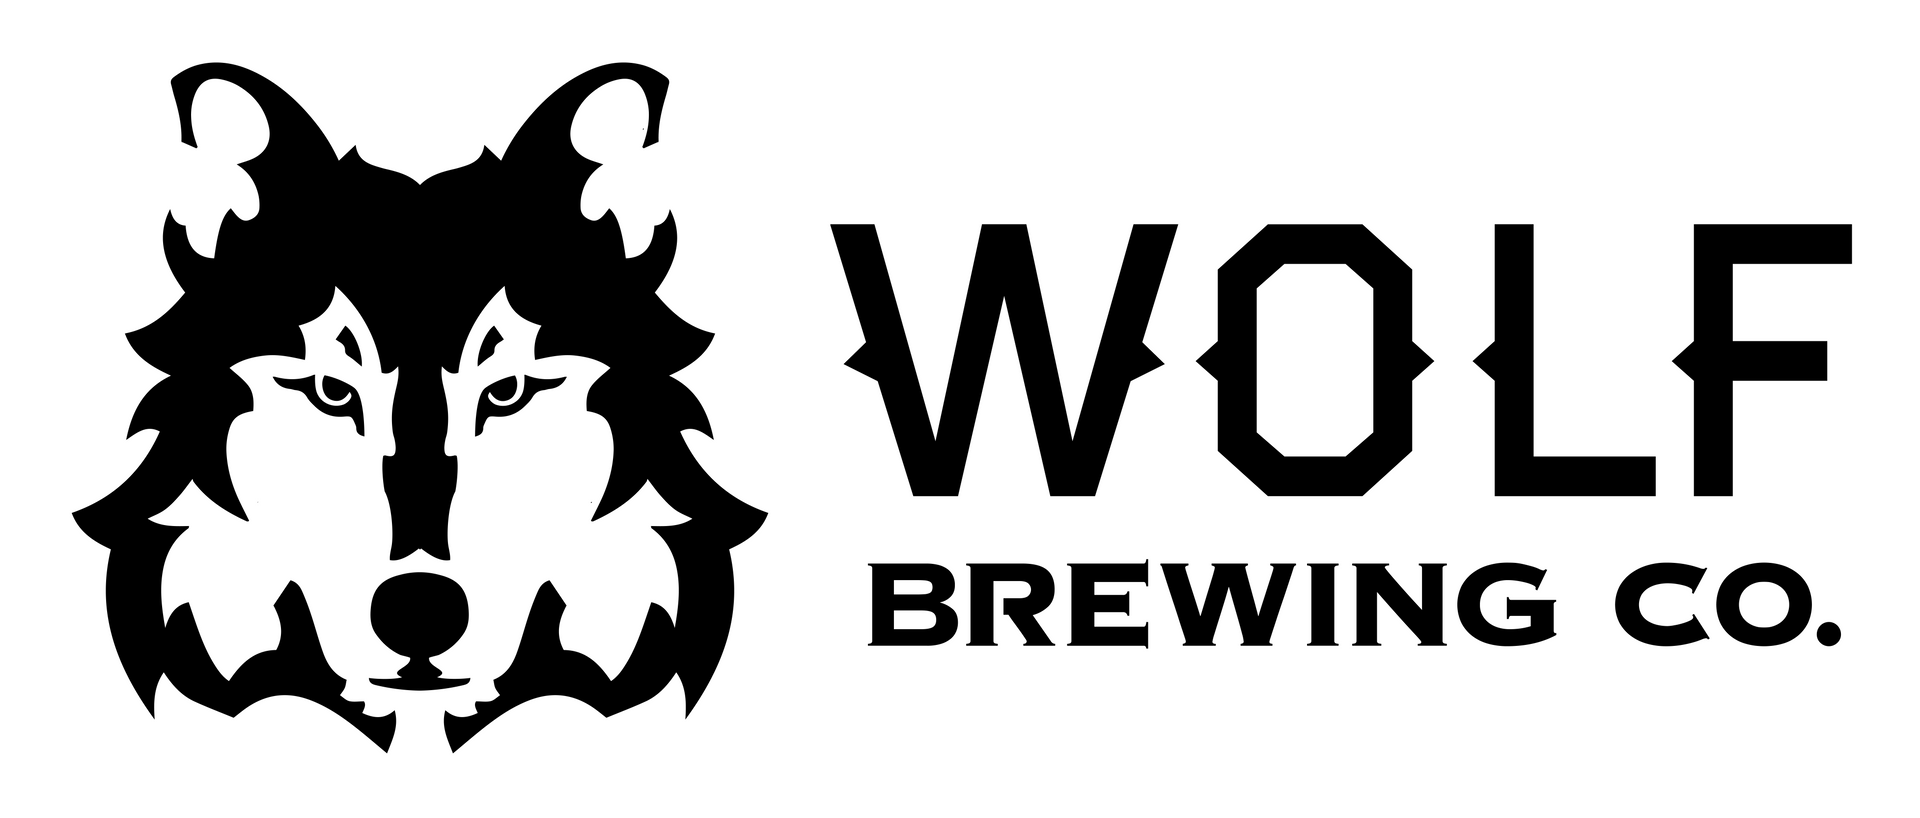 Wolf Brewing Company Logo - White Background - Horizontal-1 (1).png